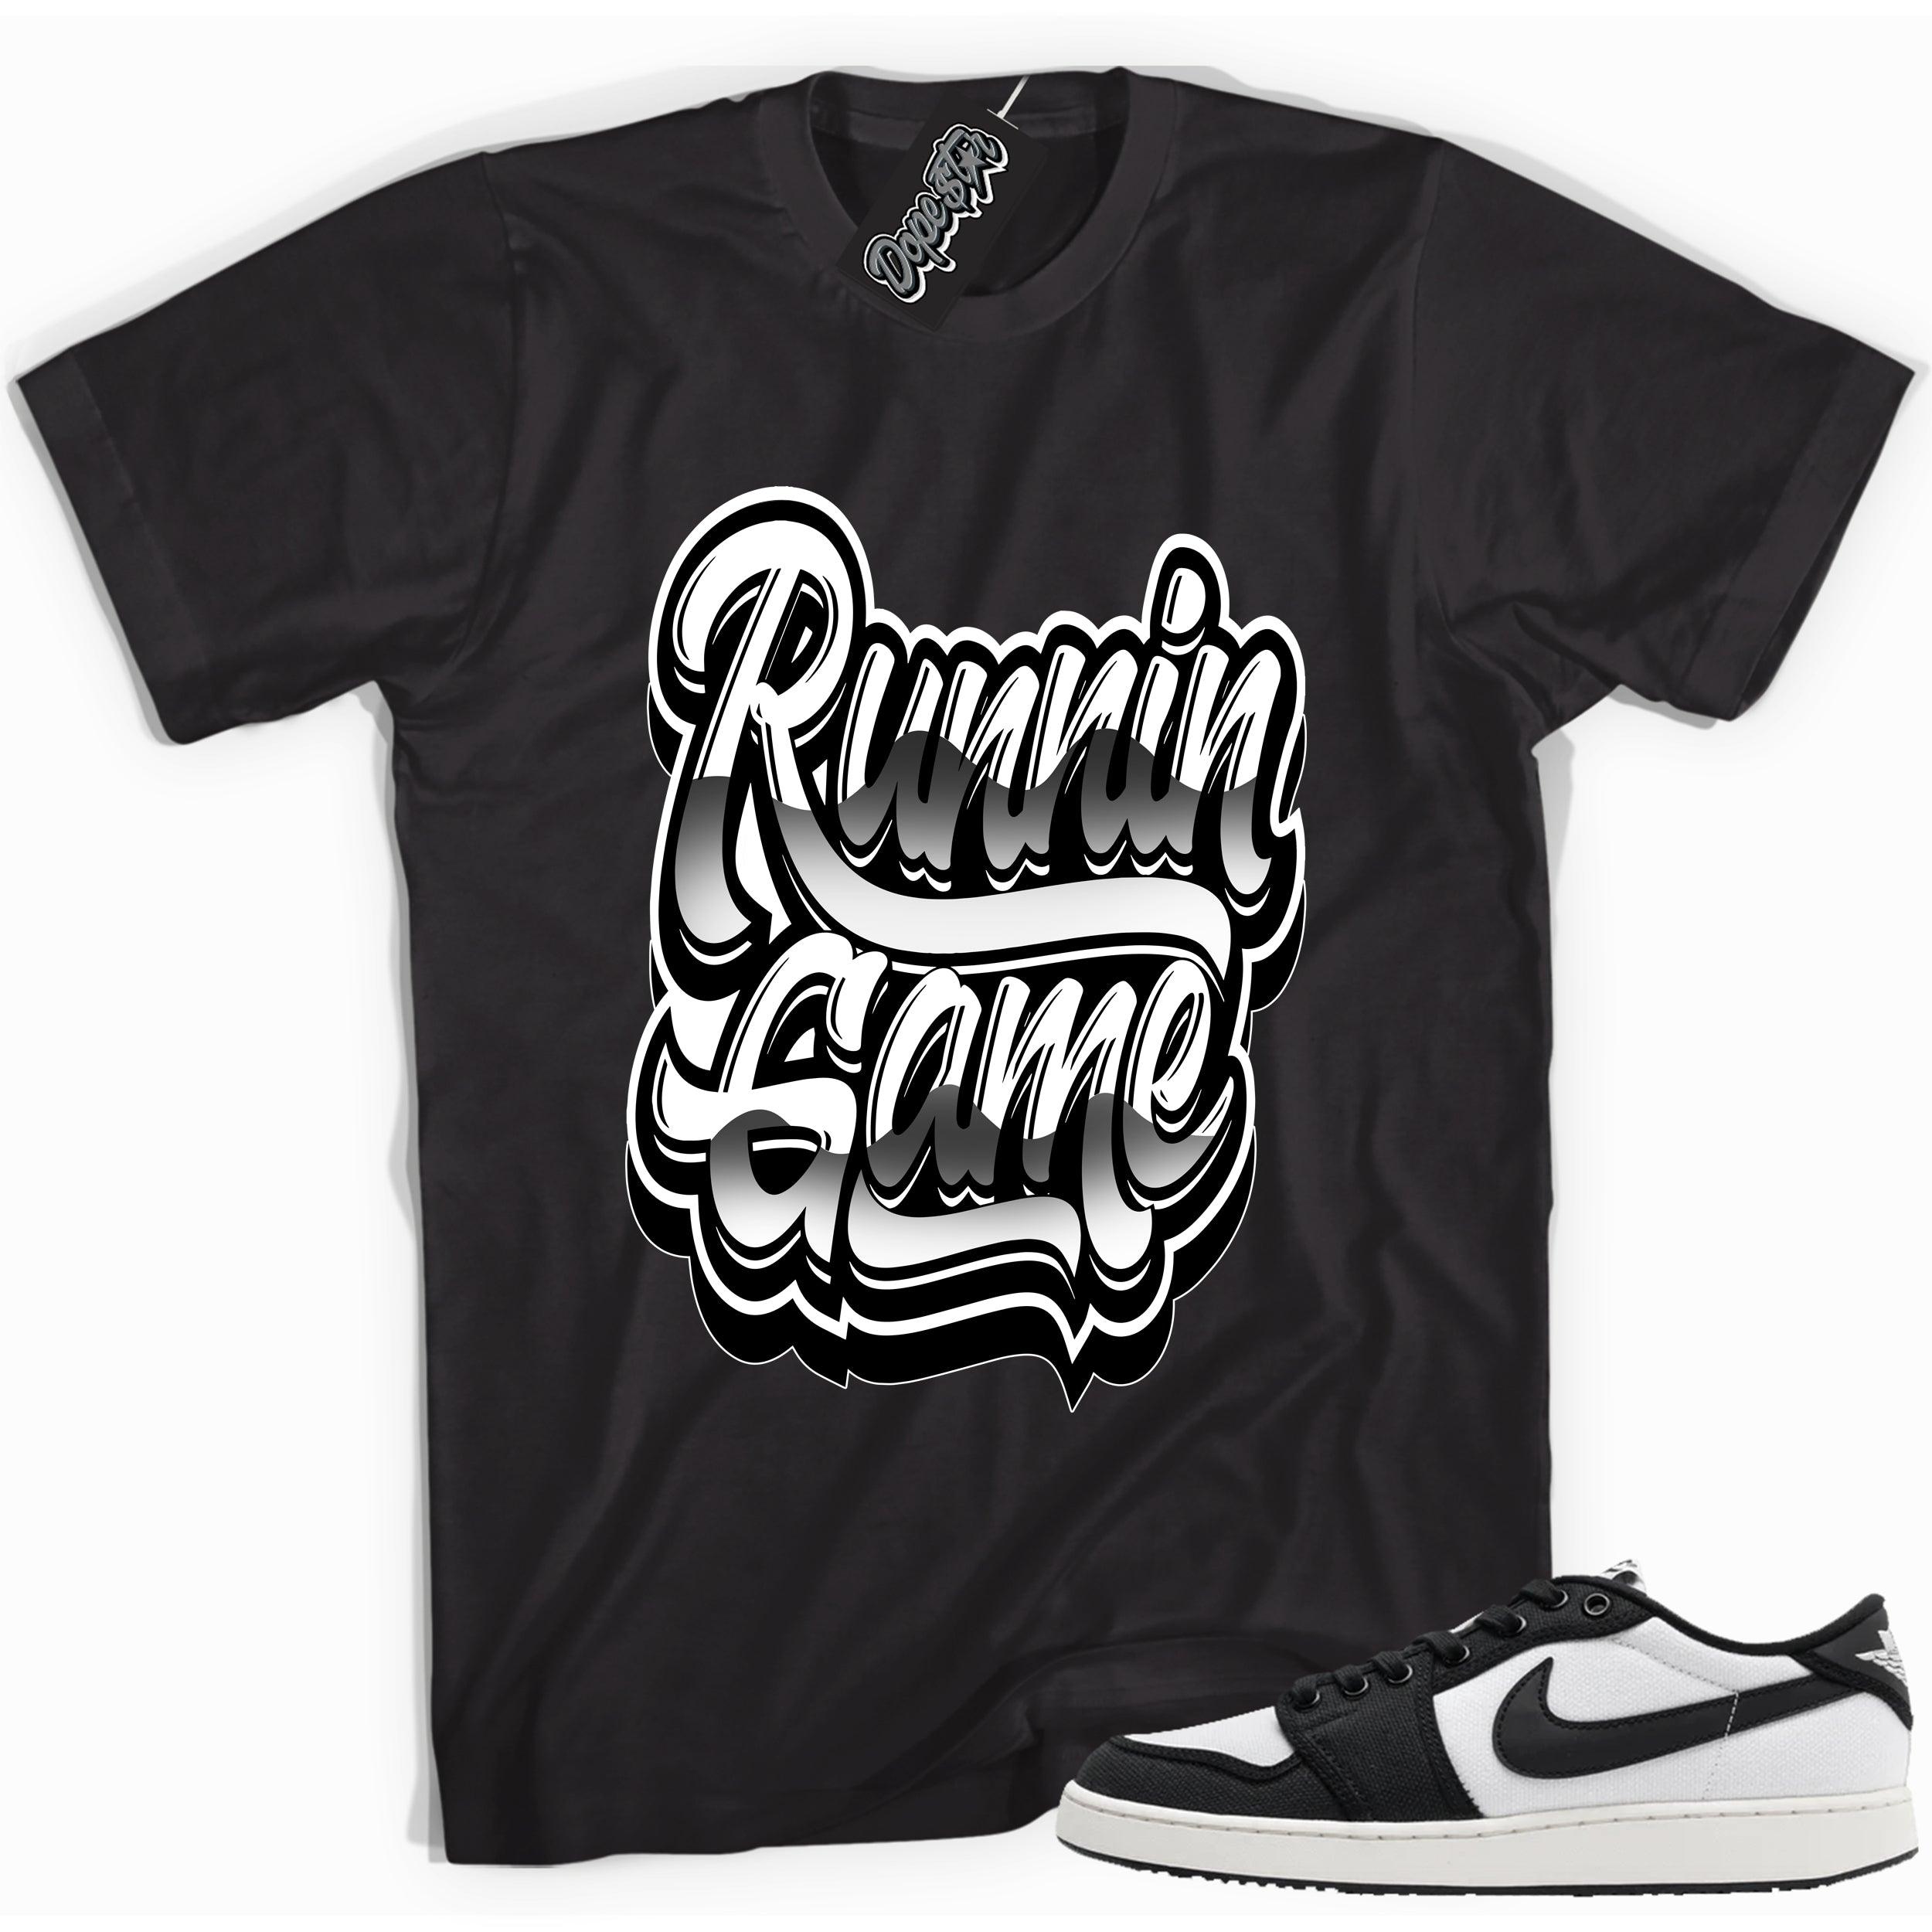 Cool black graphic tee with 'running game' print, that perfectly matches Air Jordan 1 Retro Ajko Low Black & White sneakers.